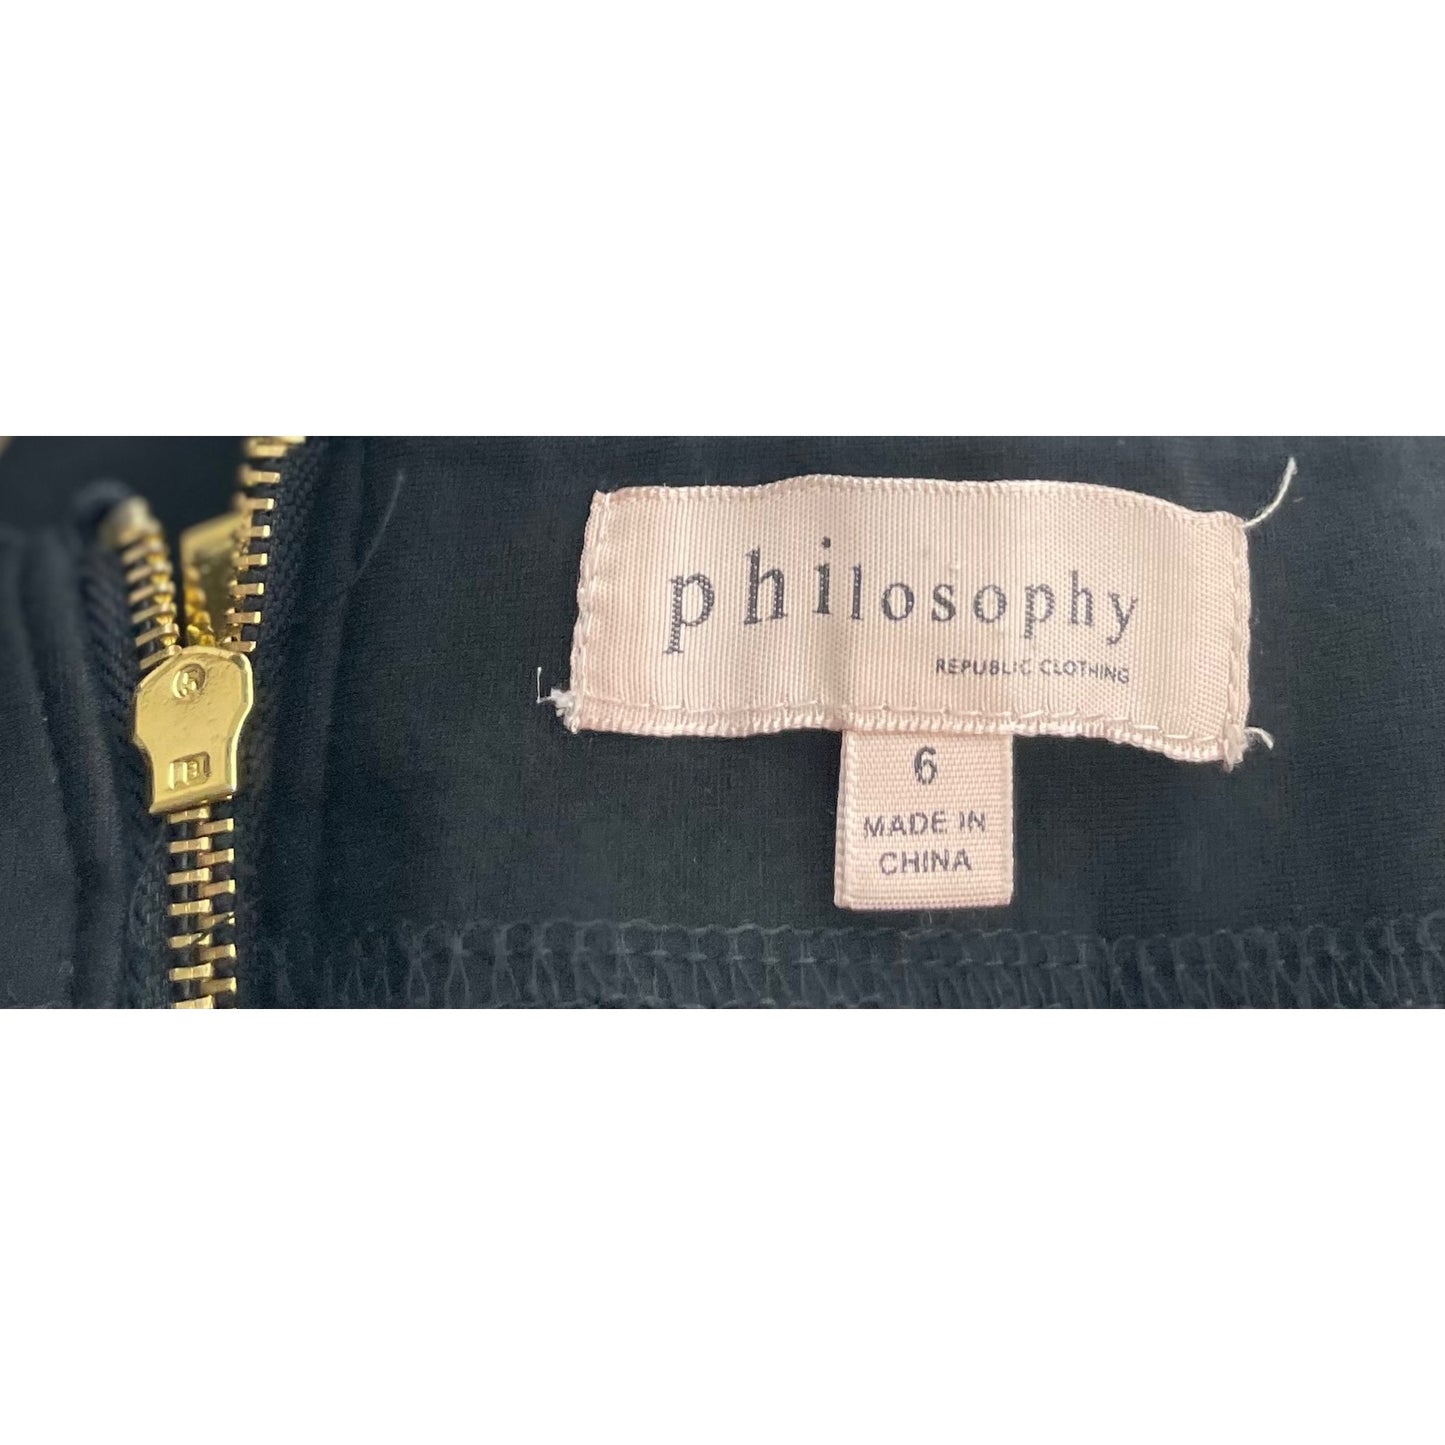 Philosophy Women's Size 6 Black Stretchy Fitted Pencil Skirt